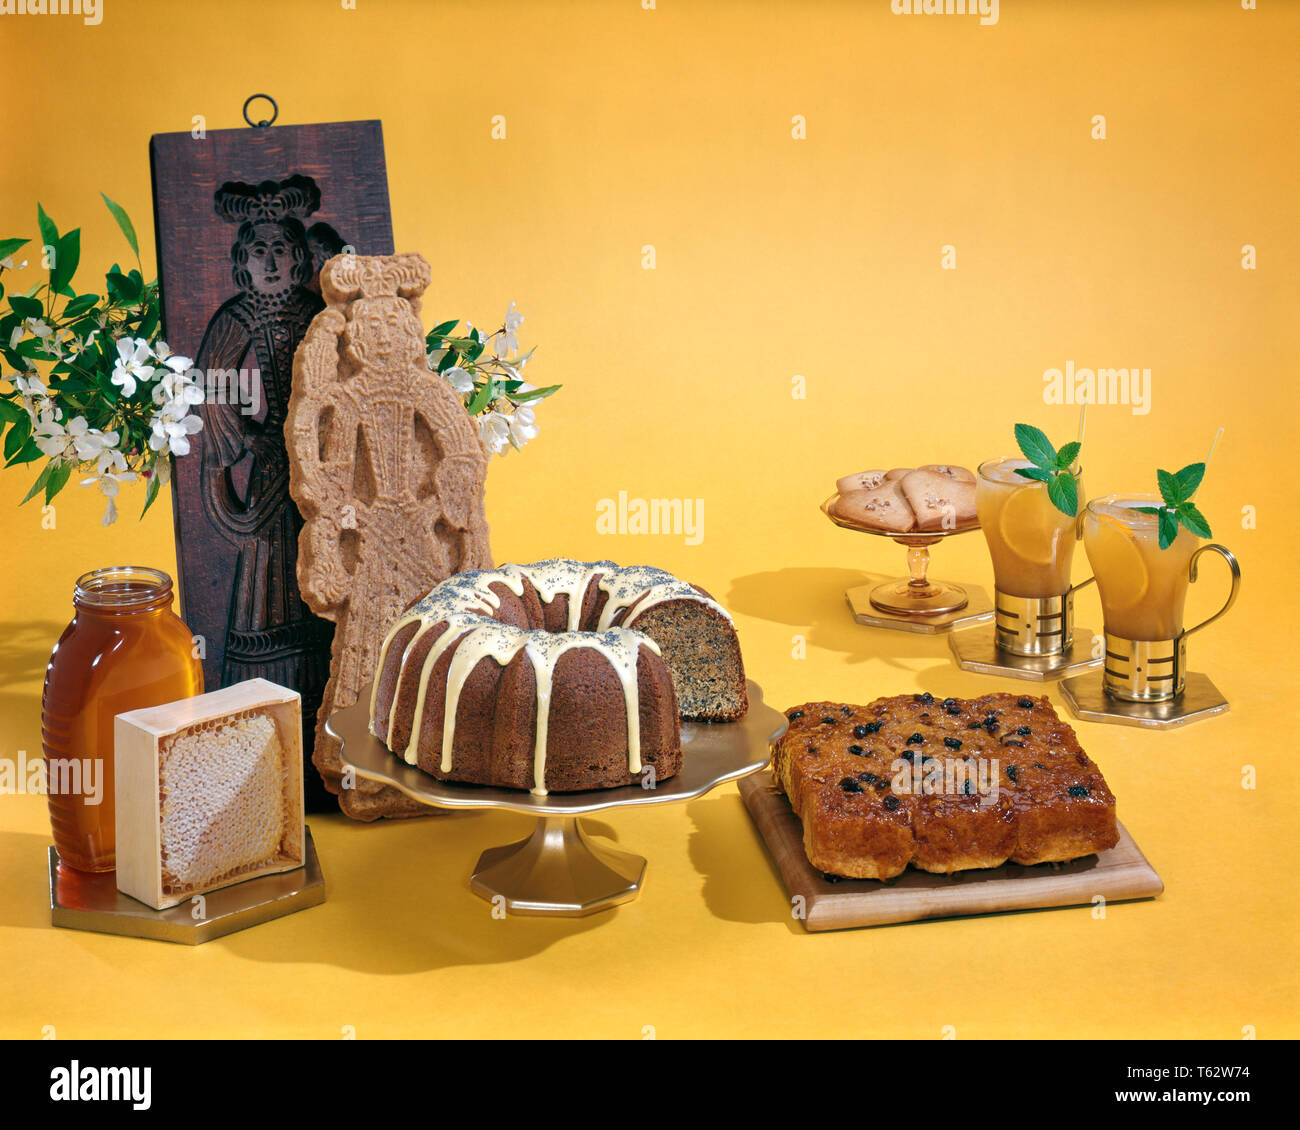 1970s HONEY BAKED GOODS STICKY BUNS GLAZED BUNDT CAKE WITH POPPY SEEDS HONEYCOMB JAR OF HONEY TWO MINT COOLER DRINKS AND COOKIES - kf11430 FRT001 HARS OLD FASHIONED Stock Photo